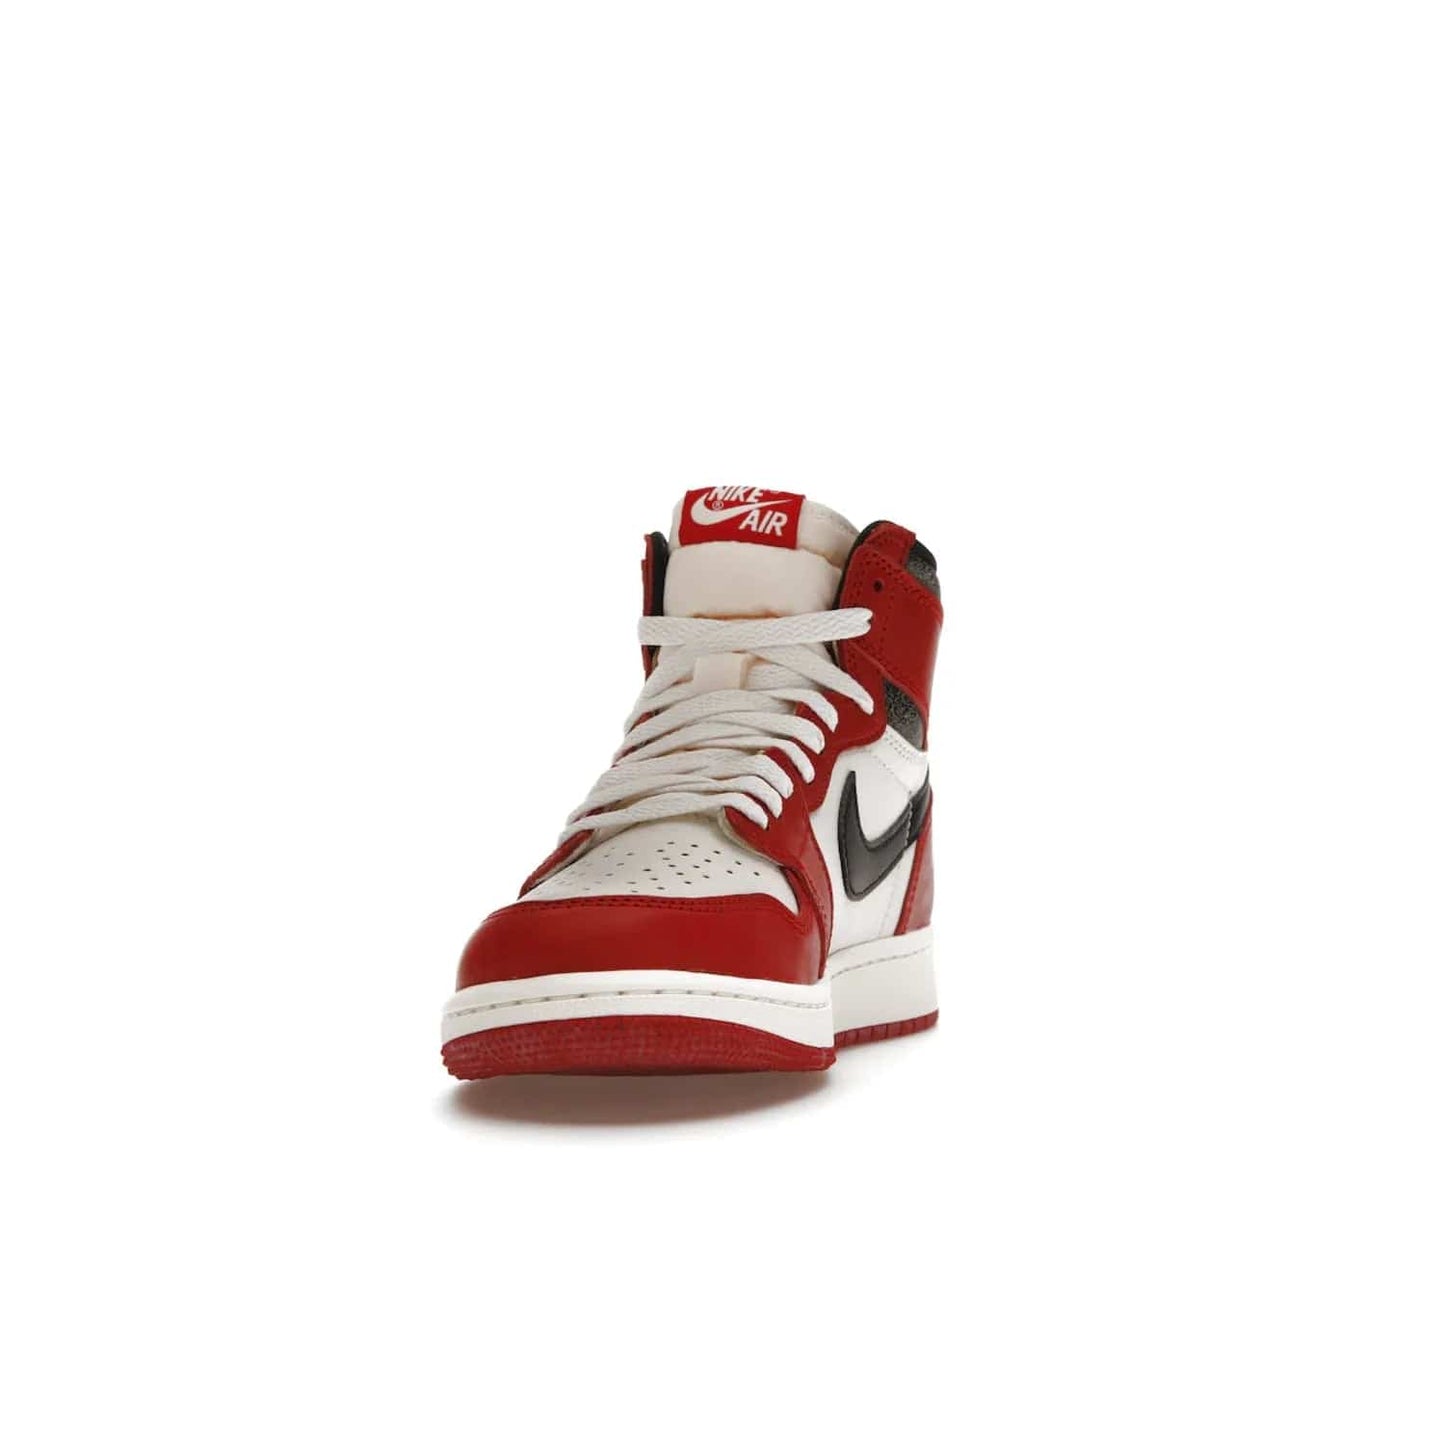 Jordan 1 Retro High OG Chicago Lost and Found (GS) - Image 12 - Only at www.BallersClubKickz.com - Grab the Air Jordan 1 Retro High OG Chicago Reimagined GS, presenting in classic 1985 silhouette. Varsity Red, Black, Muslin and Sail hues, featuring Nike Air branding, Wings on the collars and printed insoles. Don't miss out when it releases 19th Nov 2022.